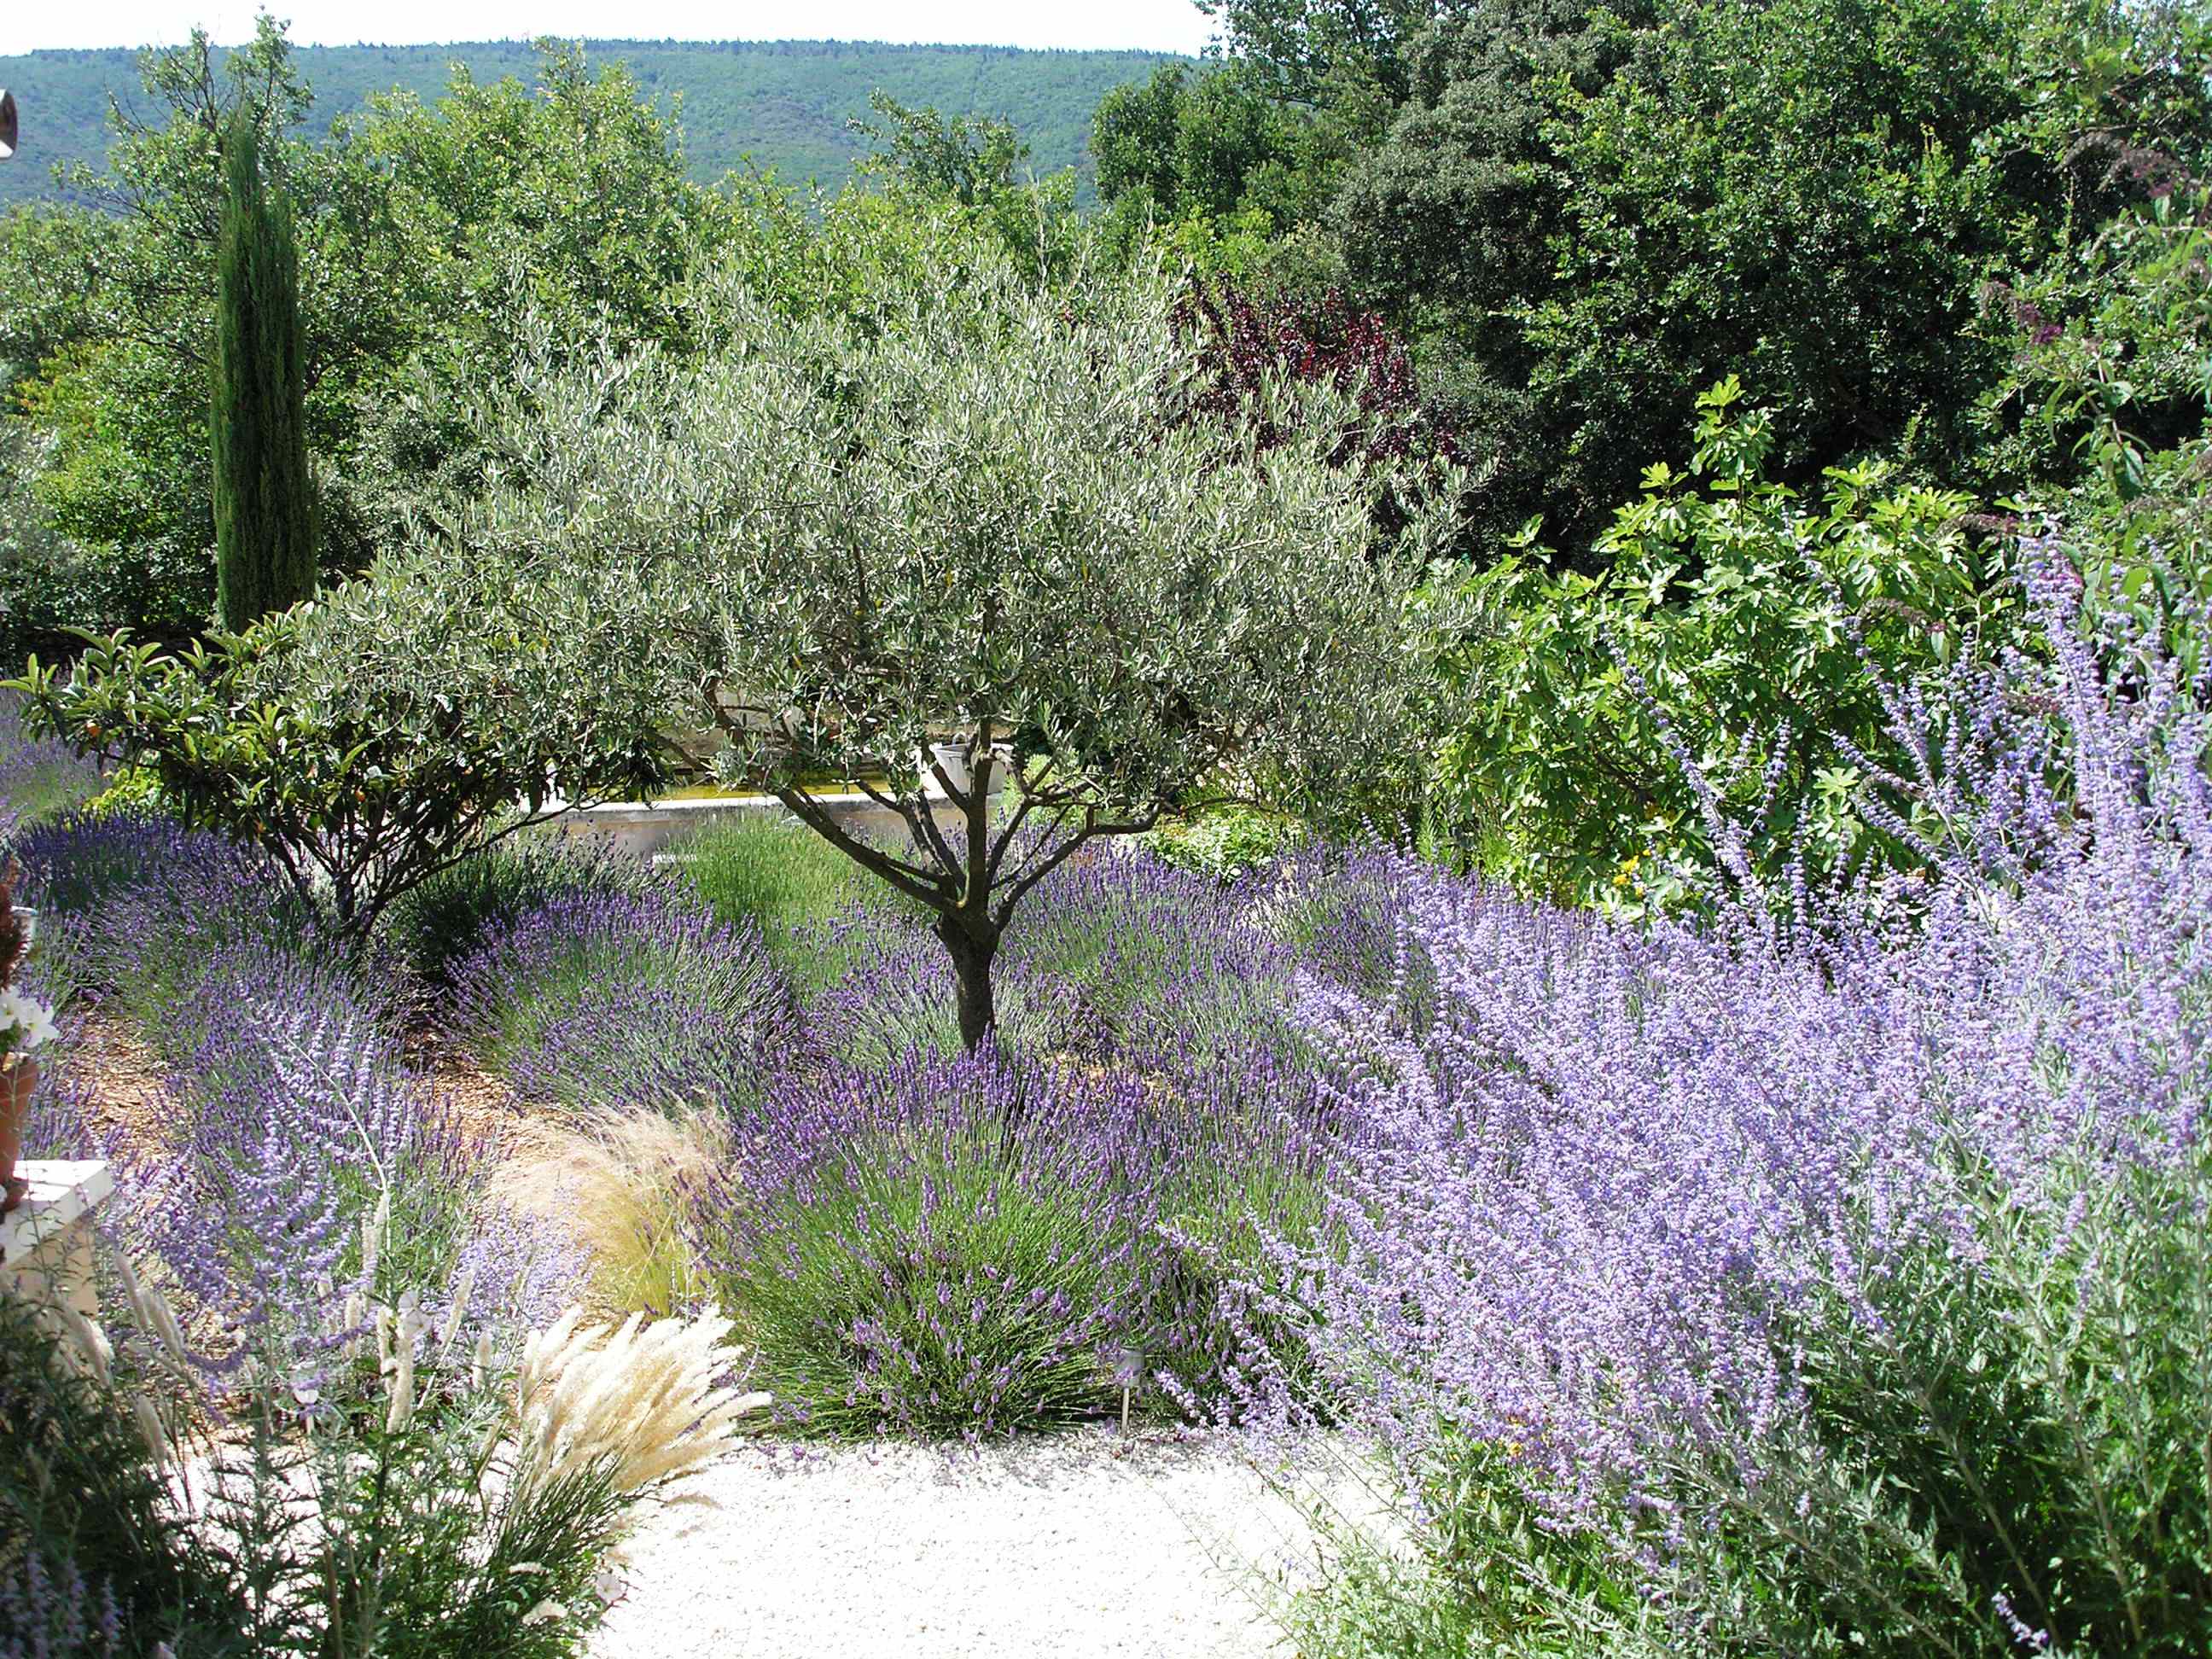 The garden is a place of relaxation and serenity with lavender